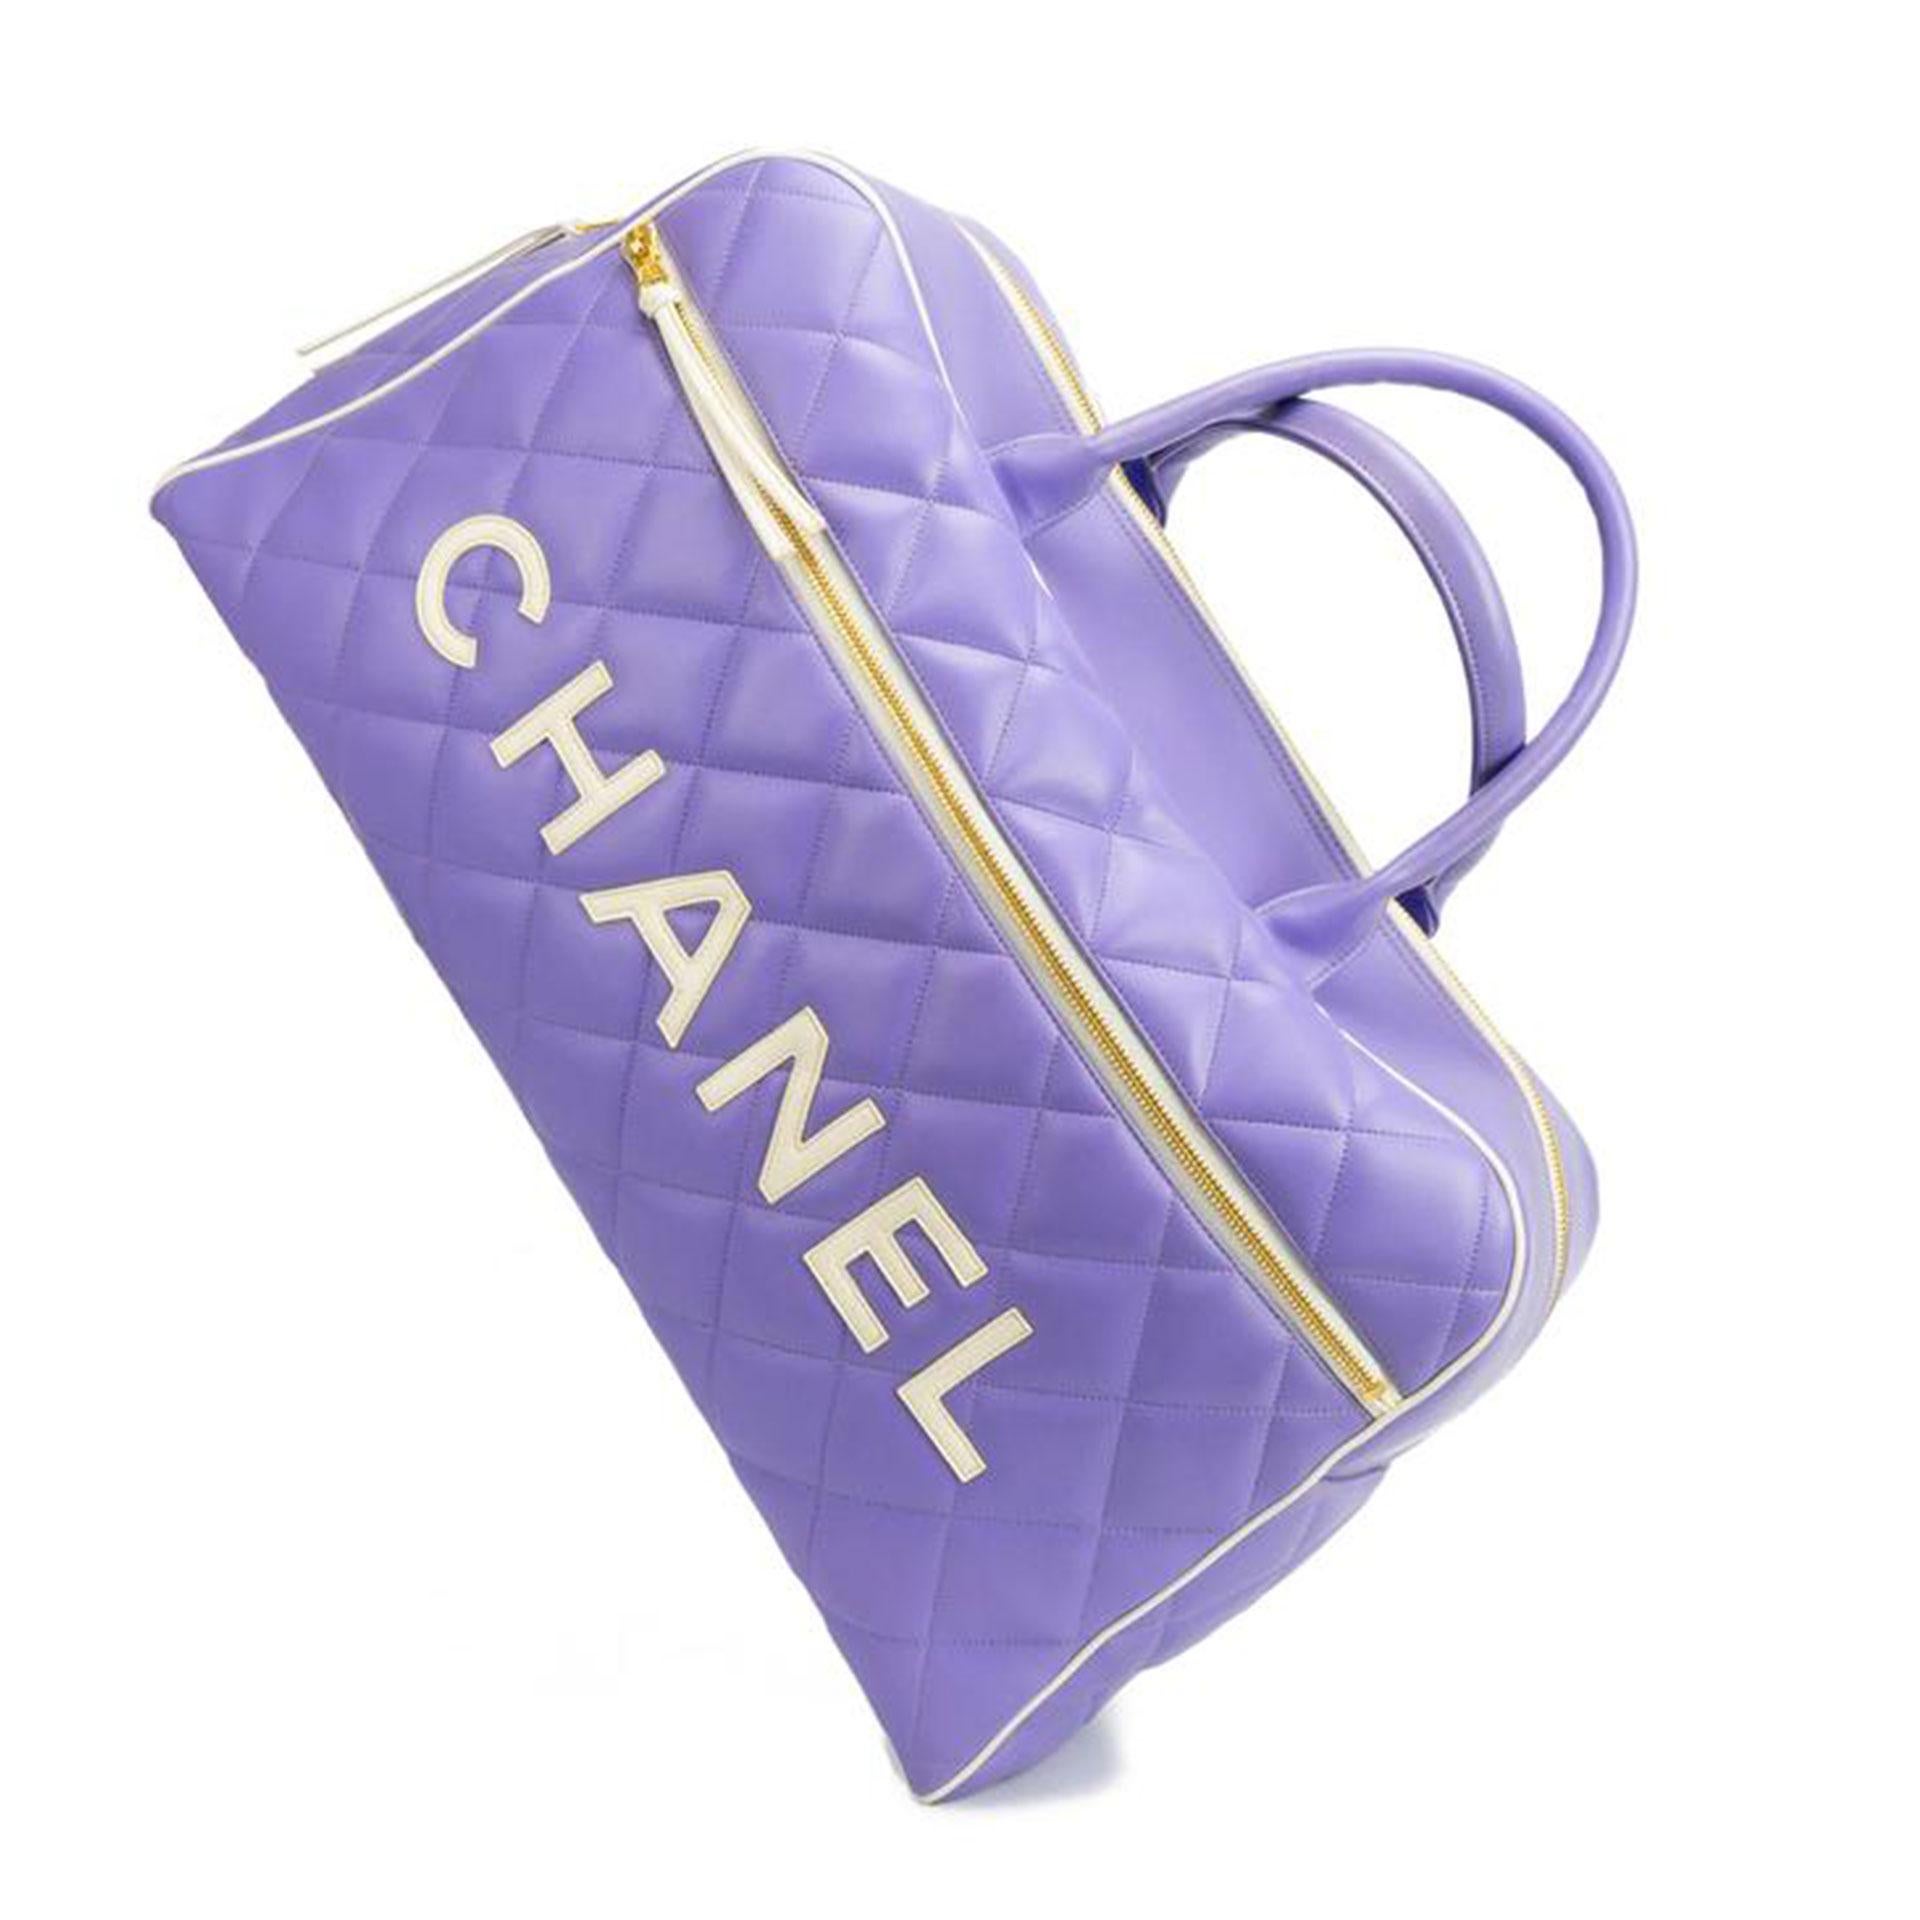 Chanel Rare Purple Vintage 1990 Weekend Duffel Overnight Duffle Tote In Good Condition For Sale In Miami, FL